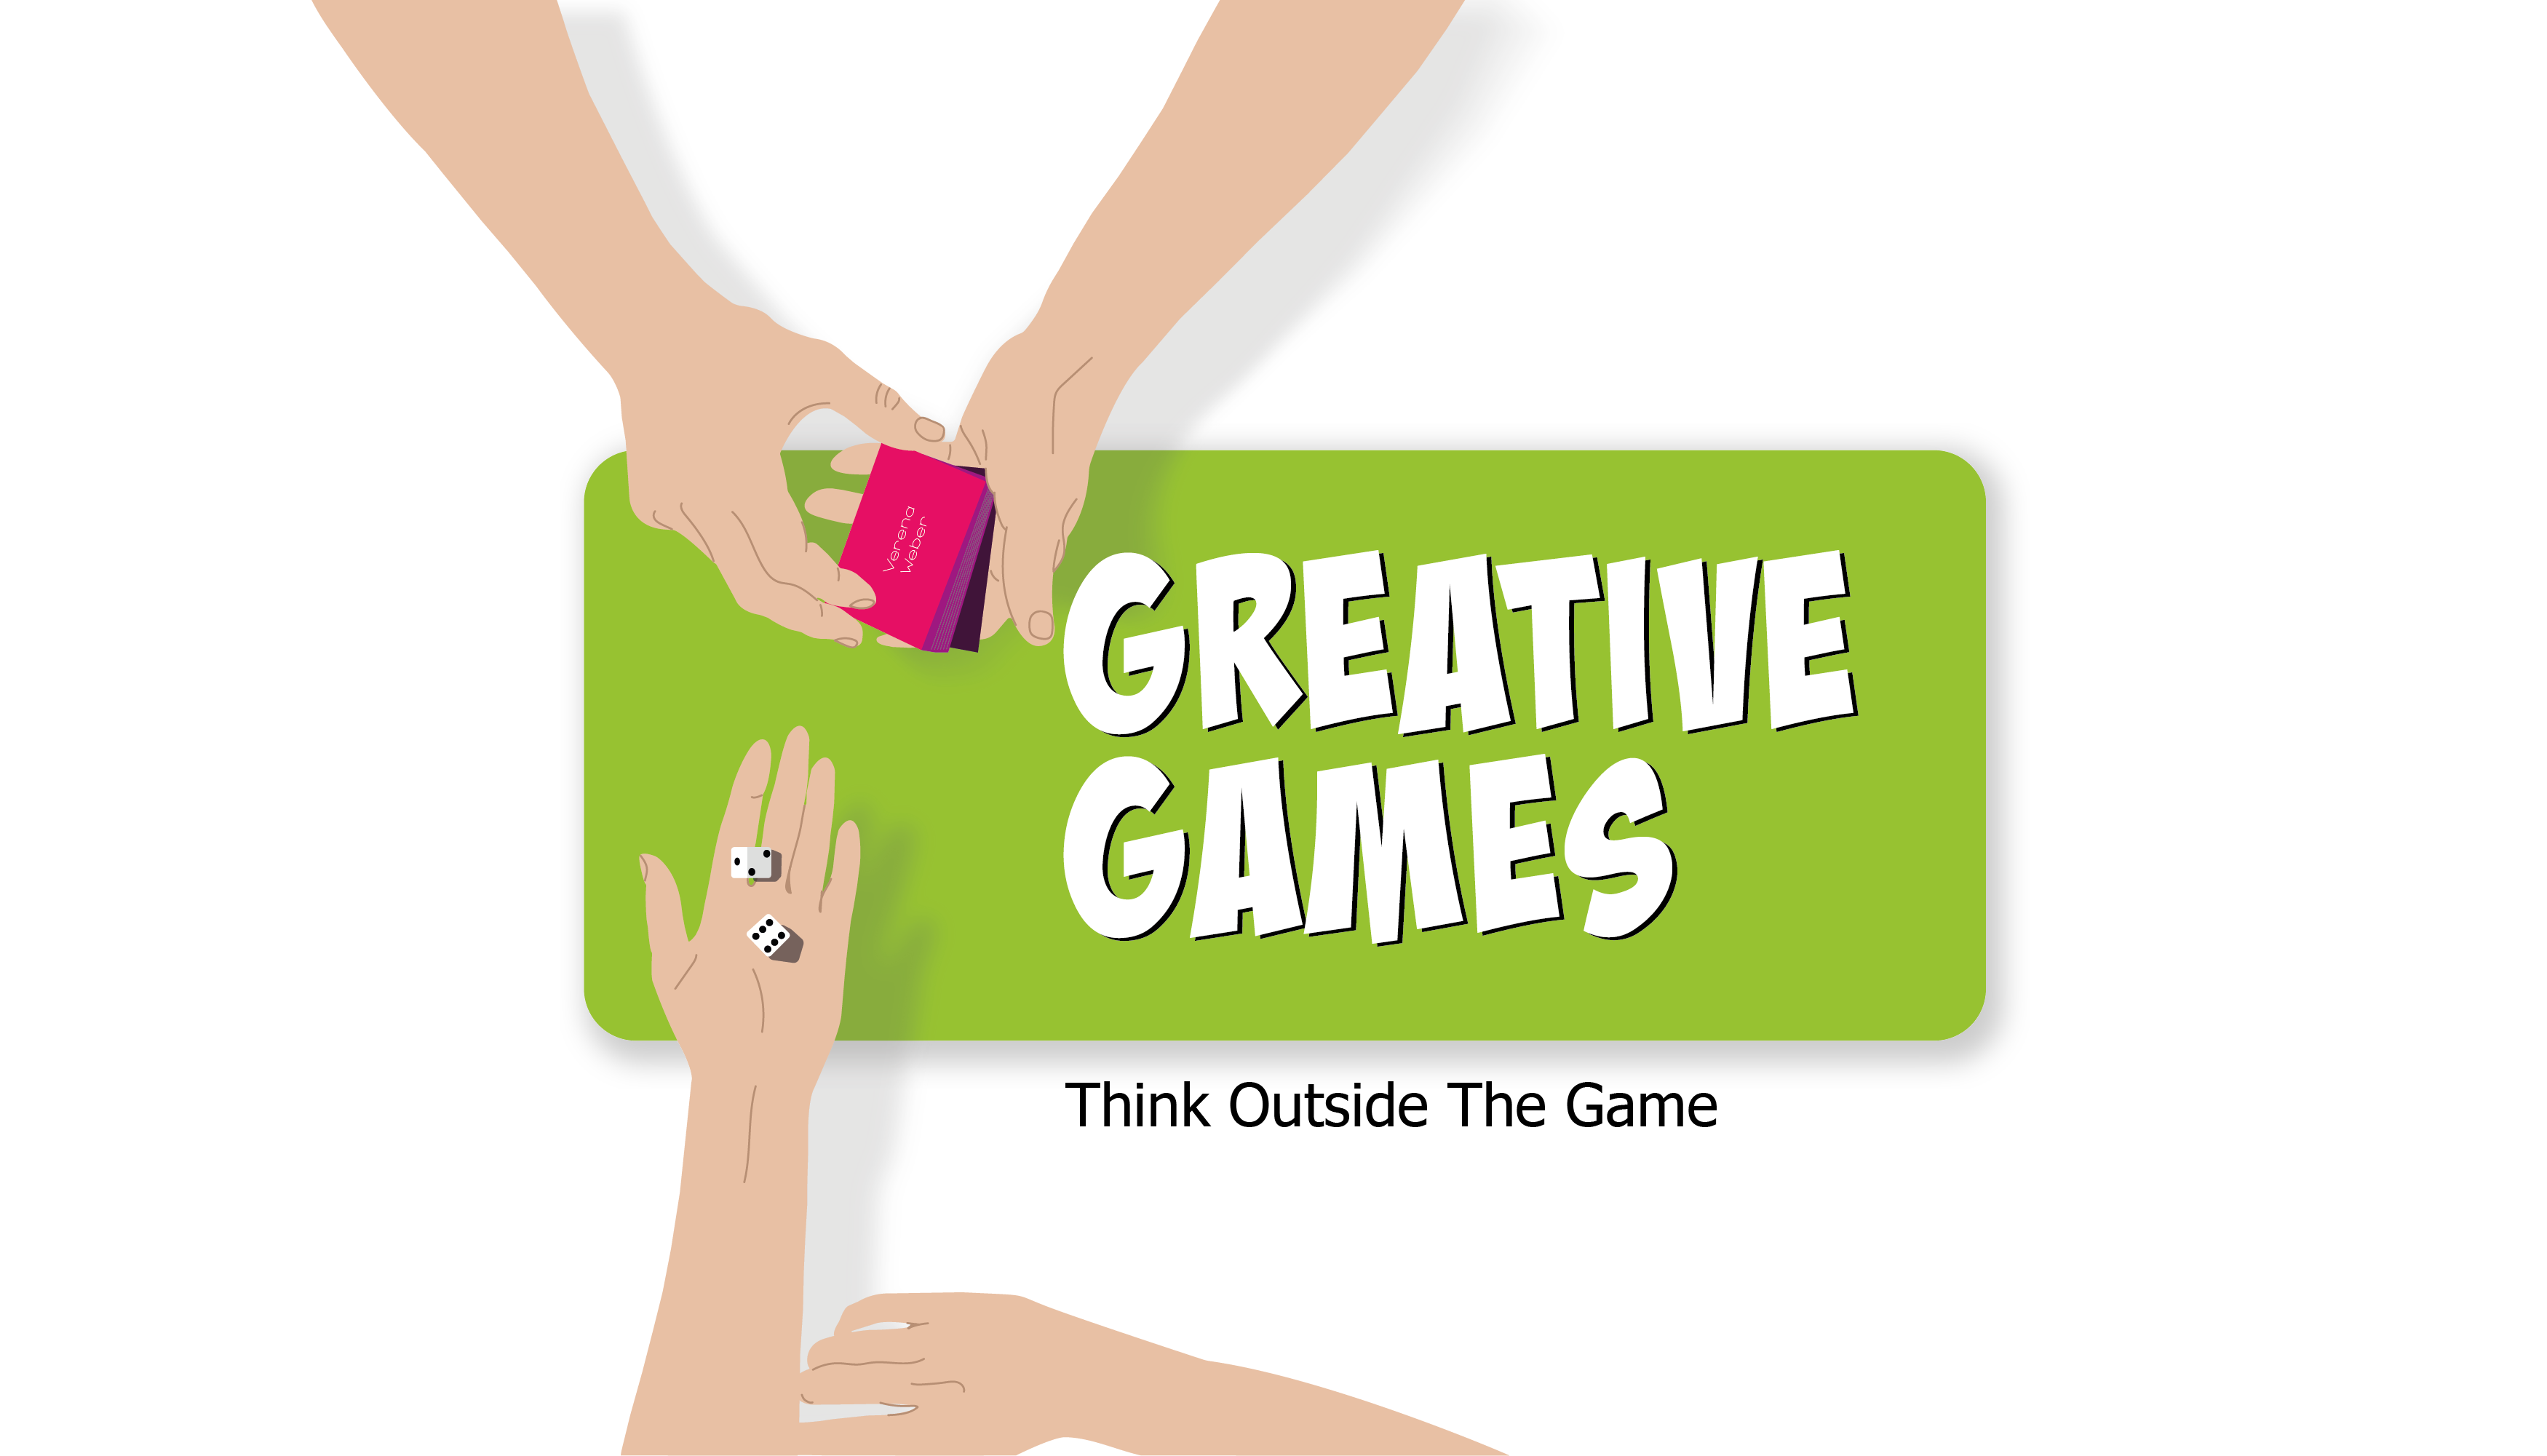 Greative Games